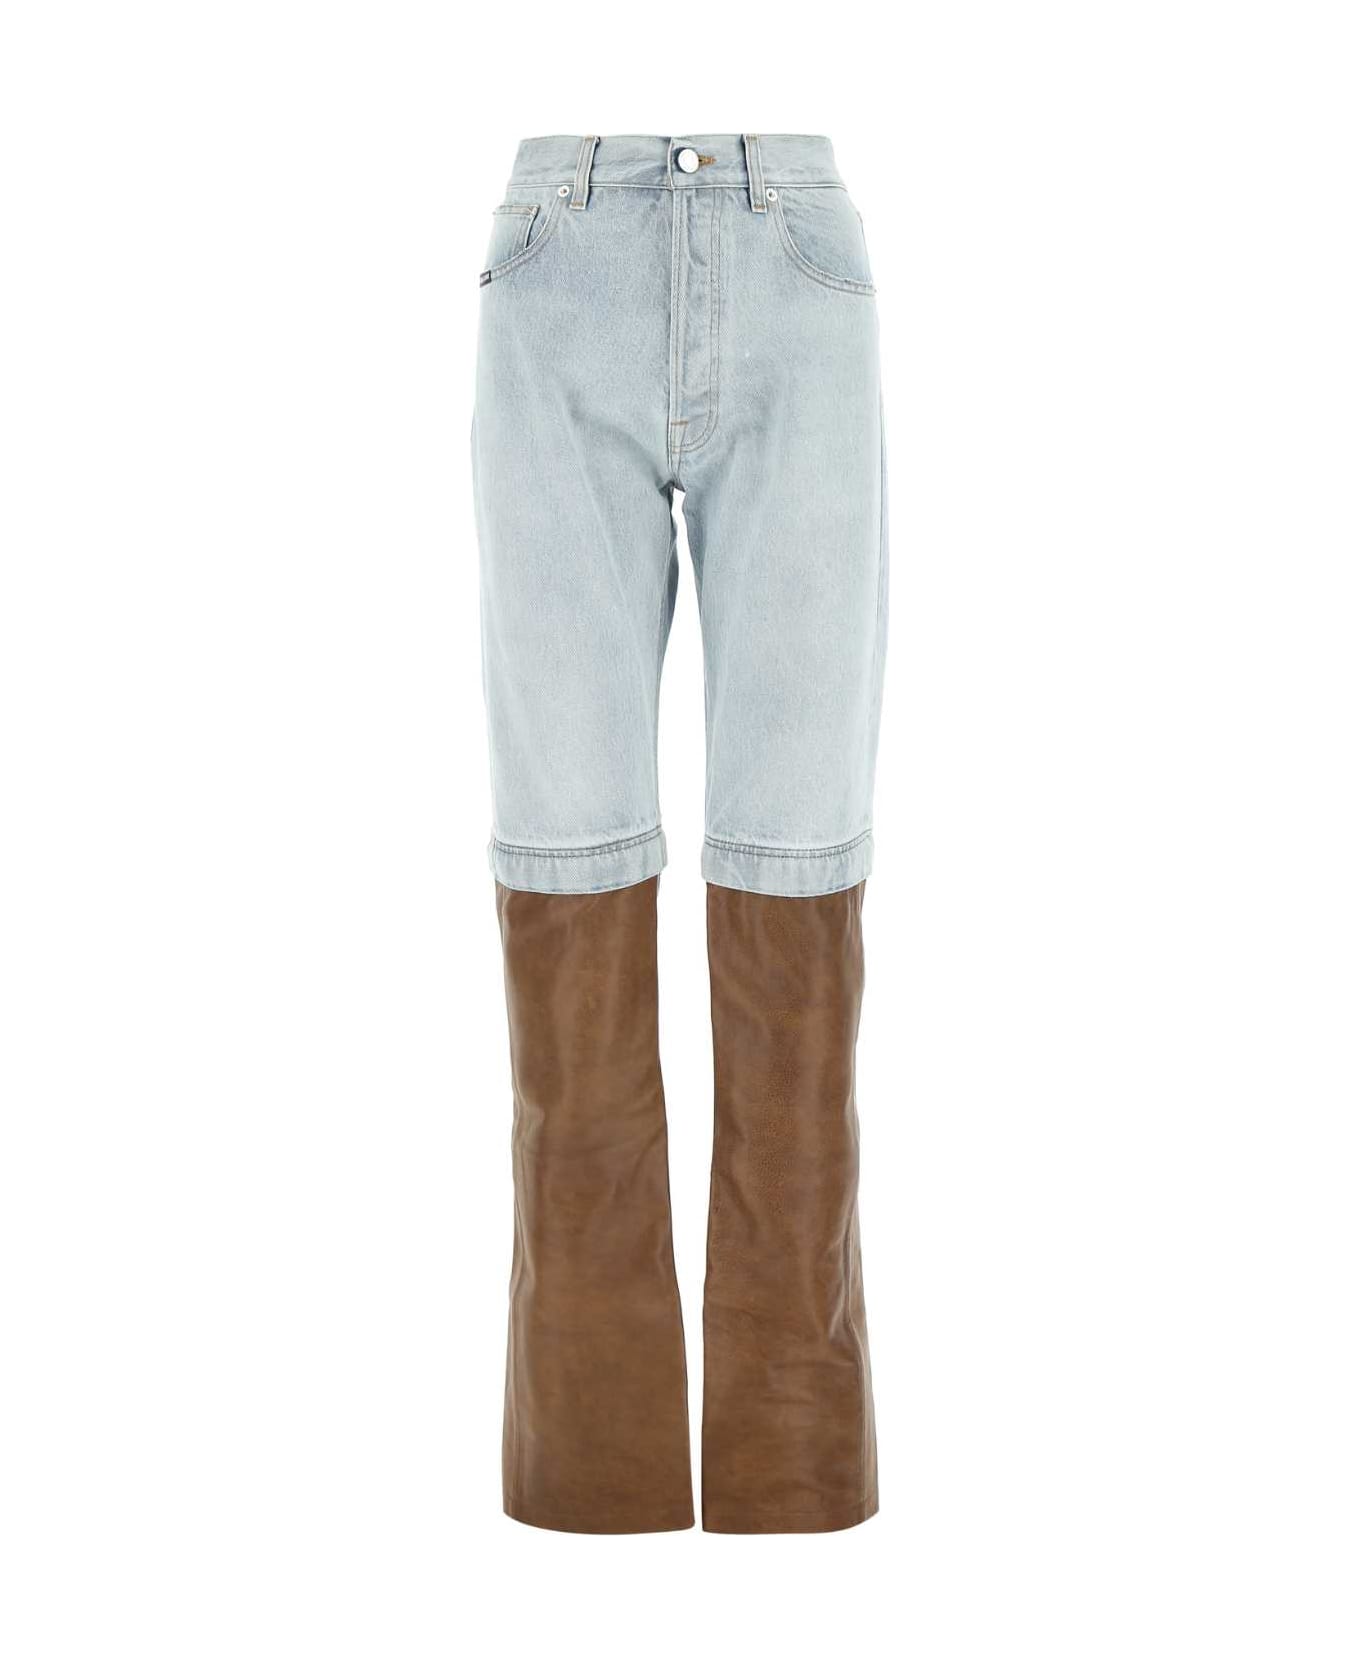 VTMNTS Two-tone Denim And Leather Jeans - BROWNLIGHTBLUE